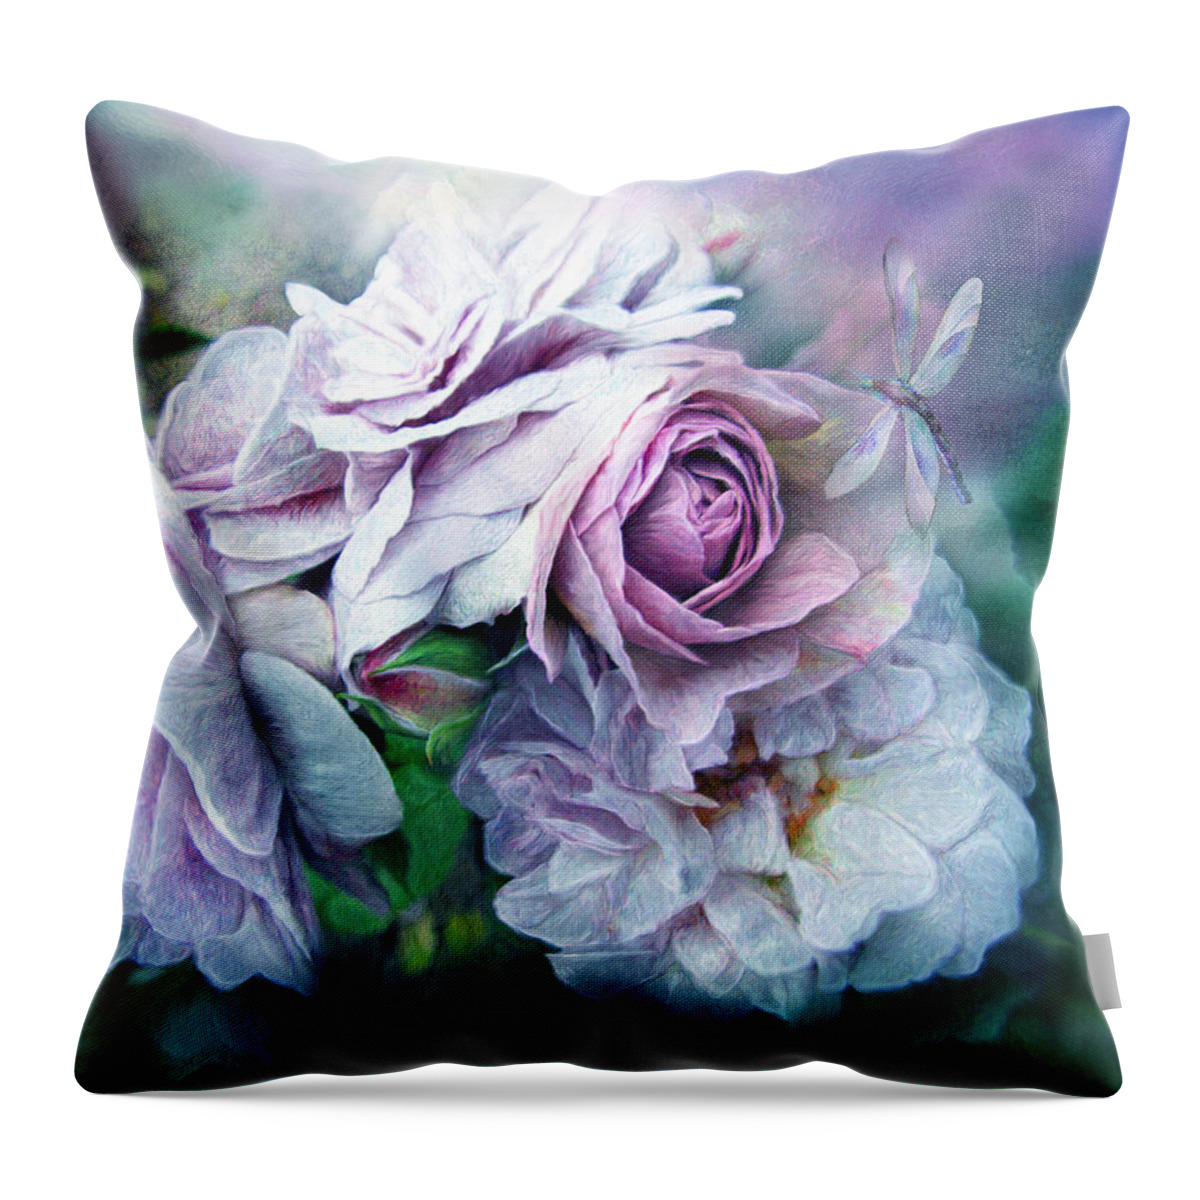 Rose Throw Pillow featuring the mixed media Miracle Of A Rose - Lavender by Carol Cavalaris